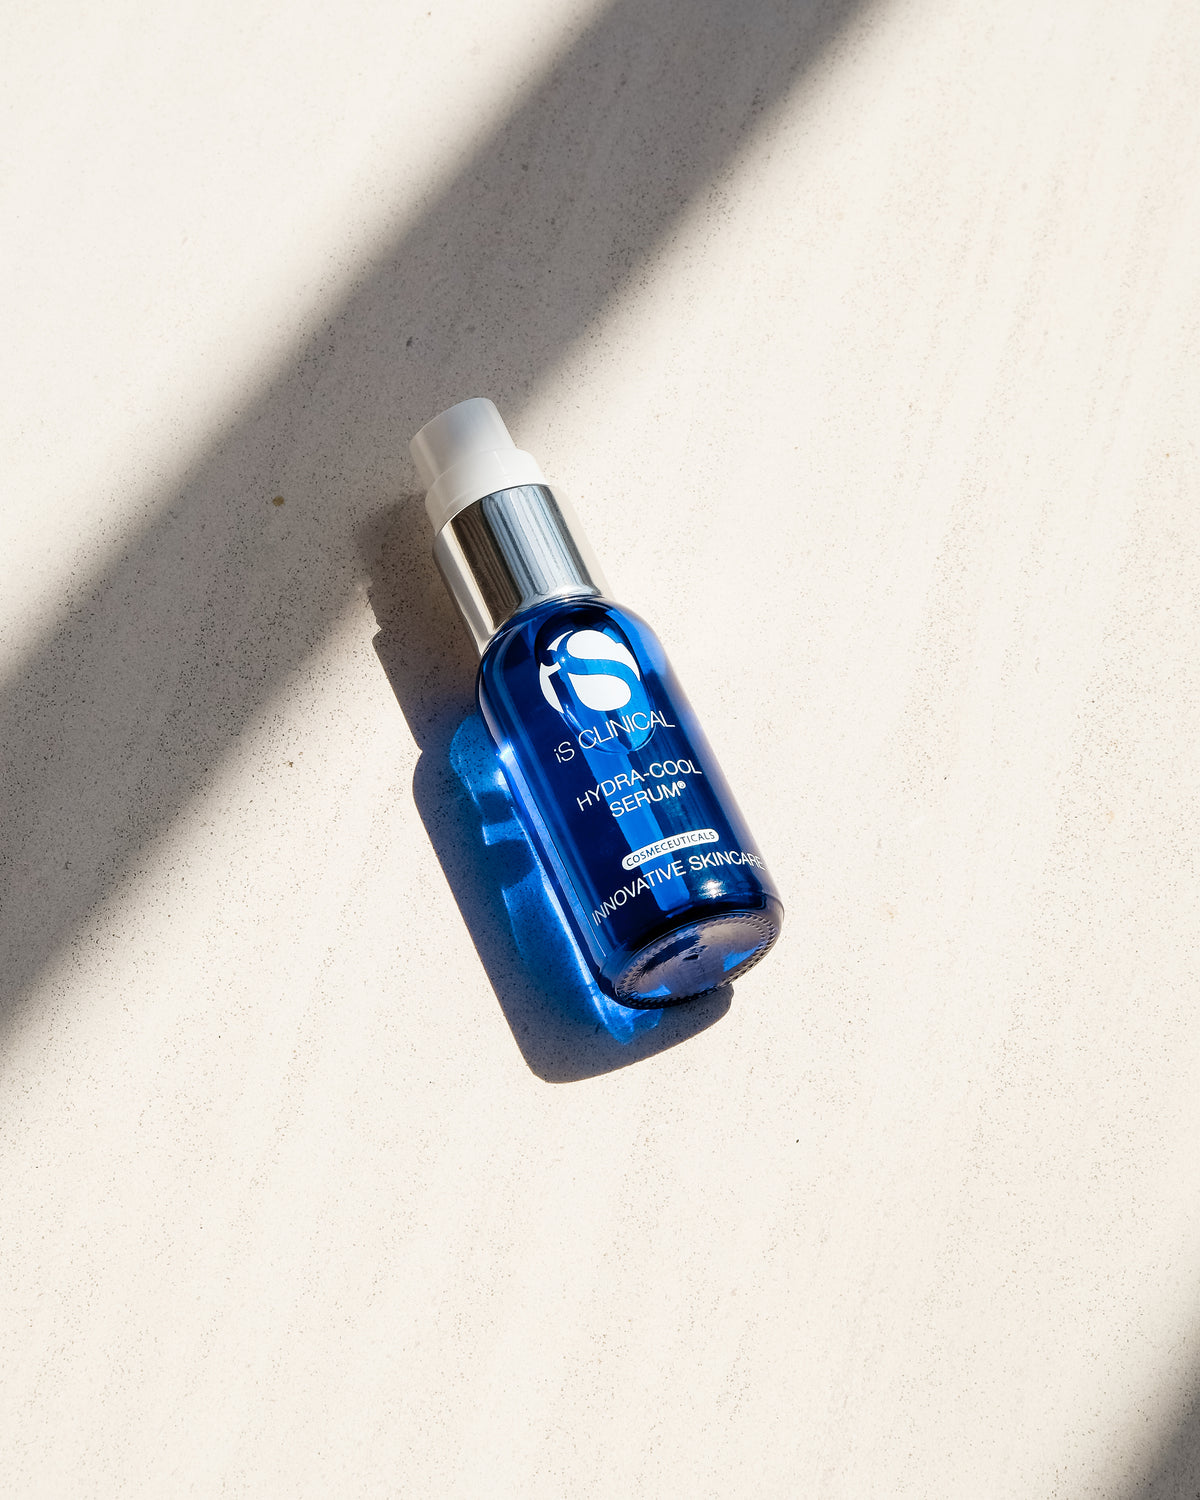 Hydra-Cool Serum - iS CLINICAL